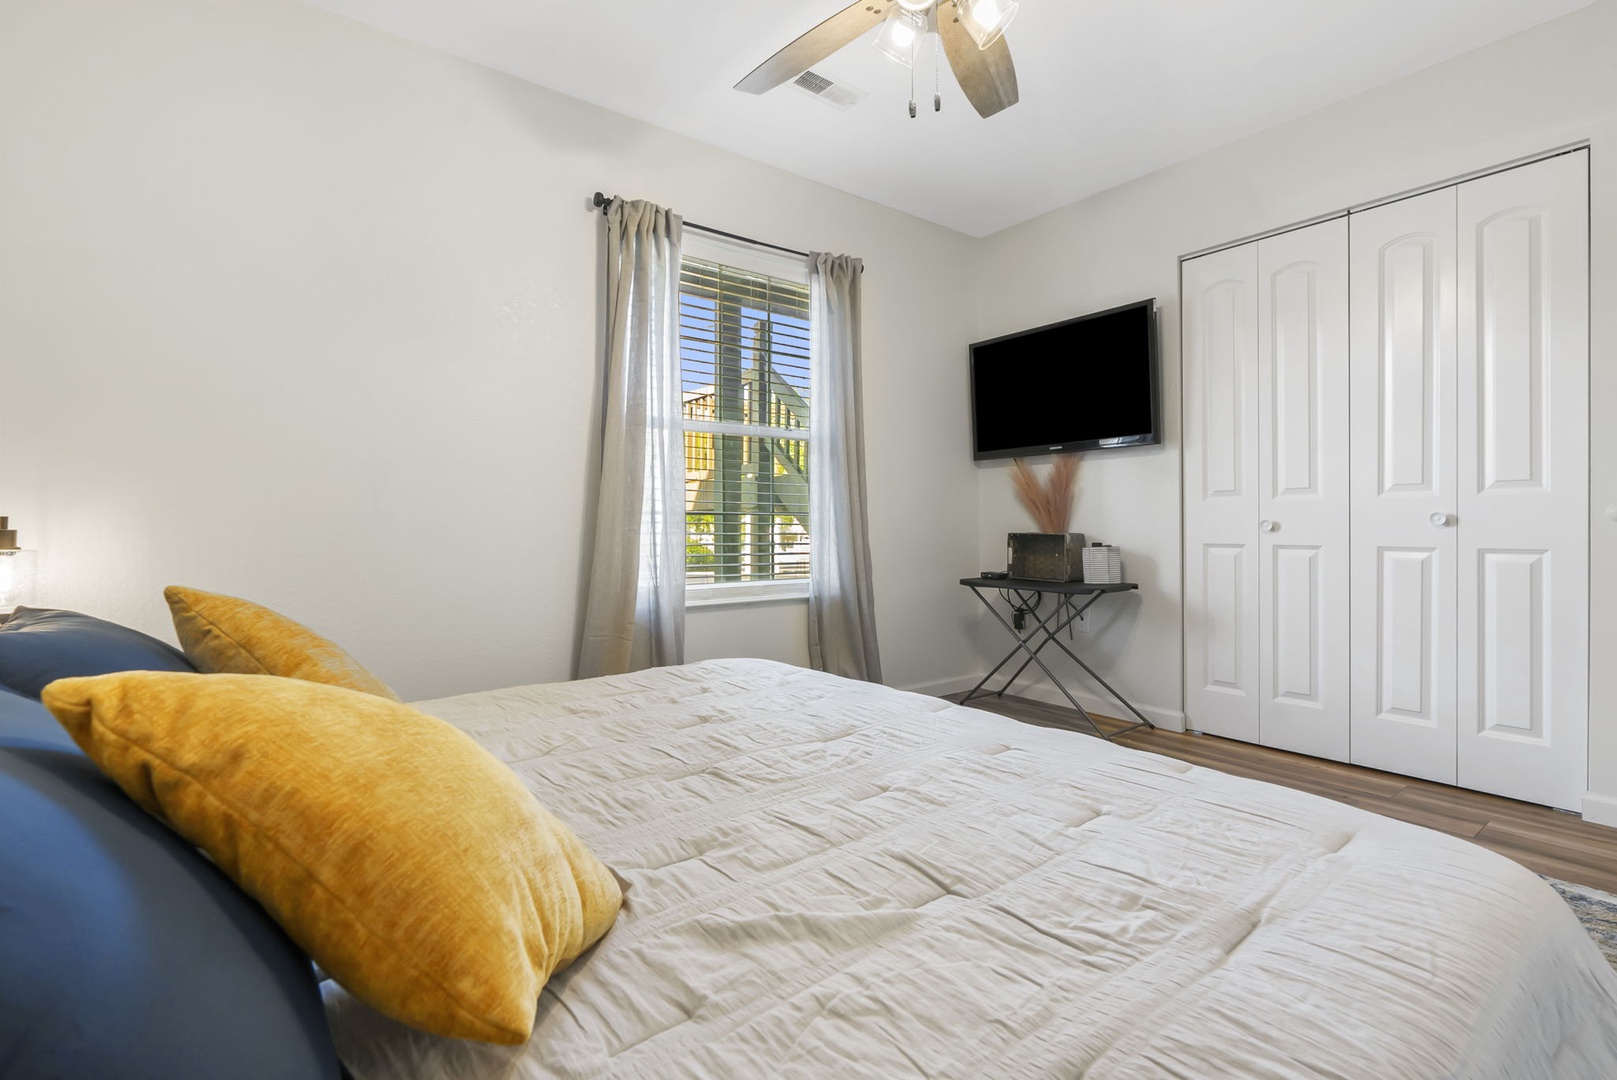 The spacious King Bedroom offers a tranquil retreat spot with its own TV